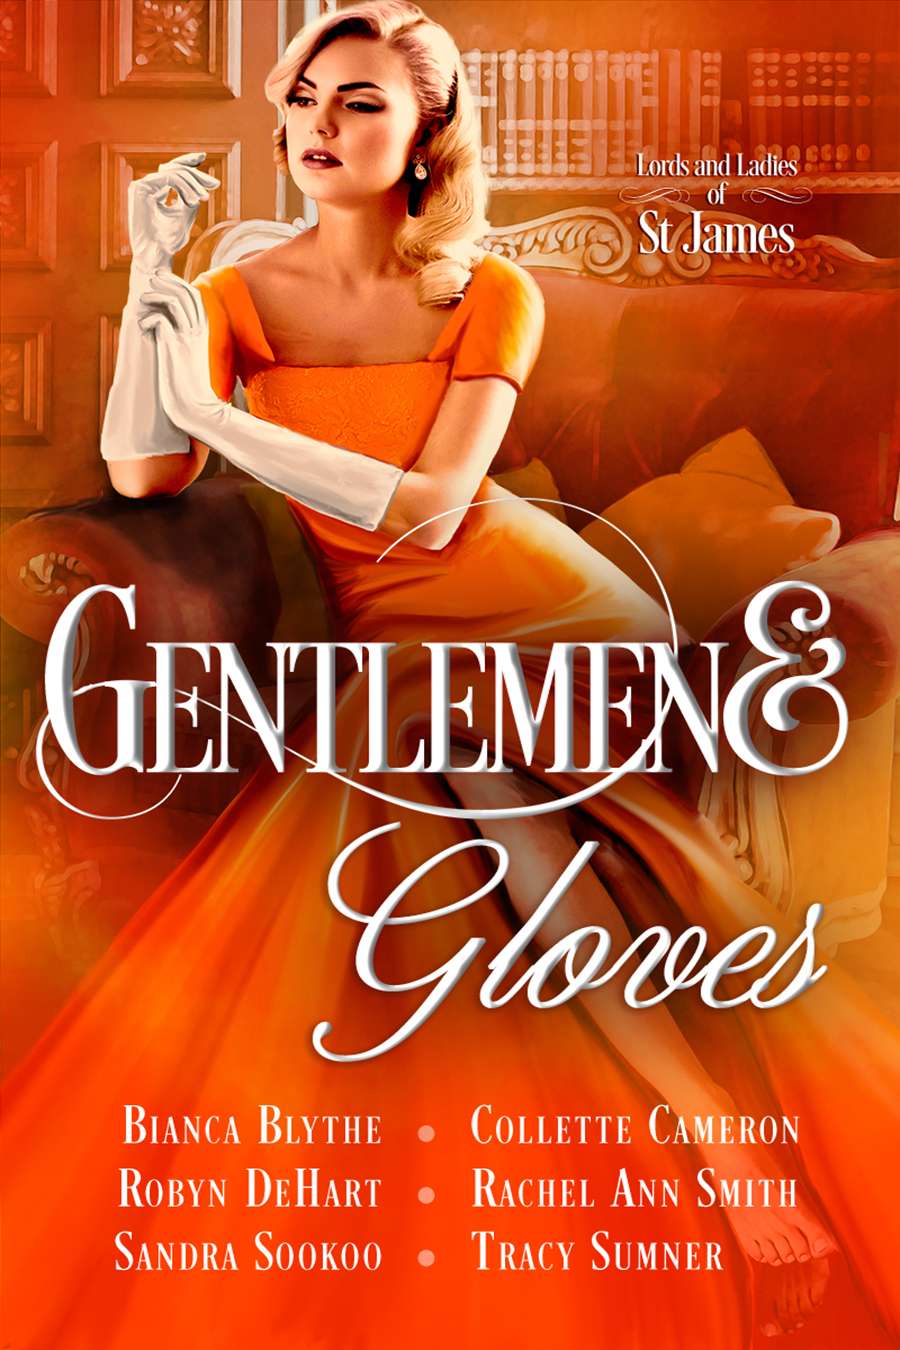 Gentlemen and Gloves, Lords and Ladies of St. James, Collette Cameron, Collette Cameron Historical romance, historical romance 2023, Regency romance 2023,